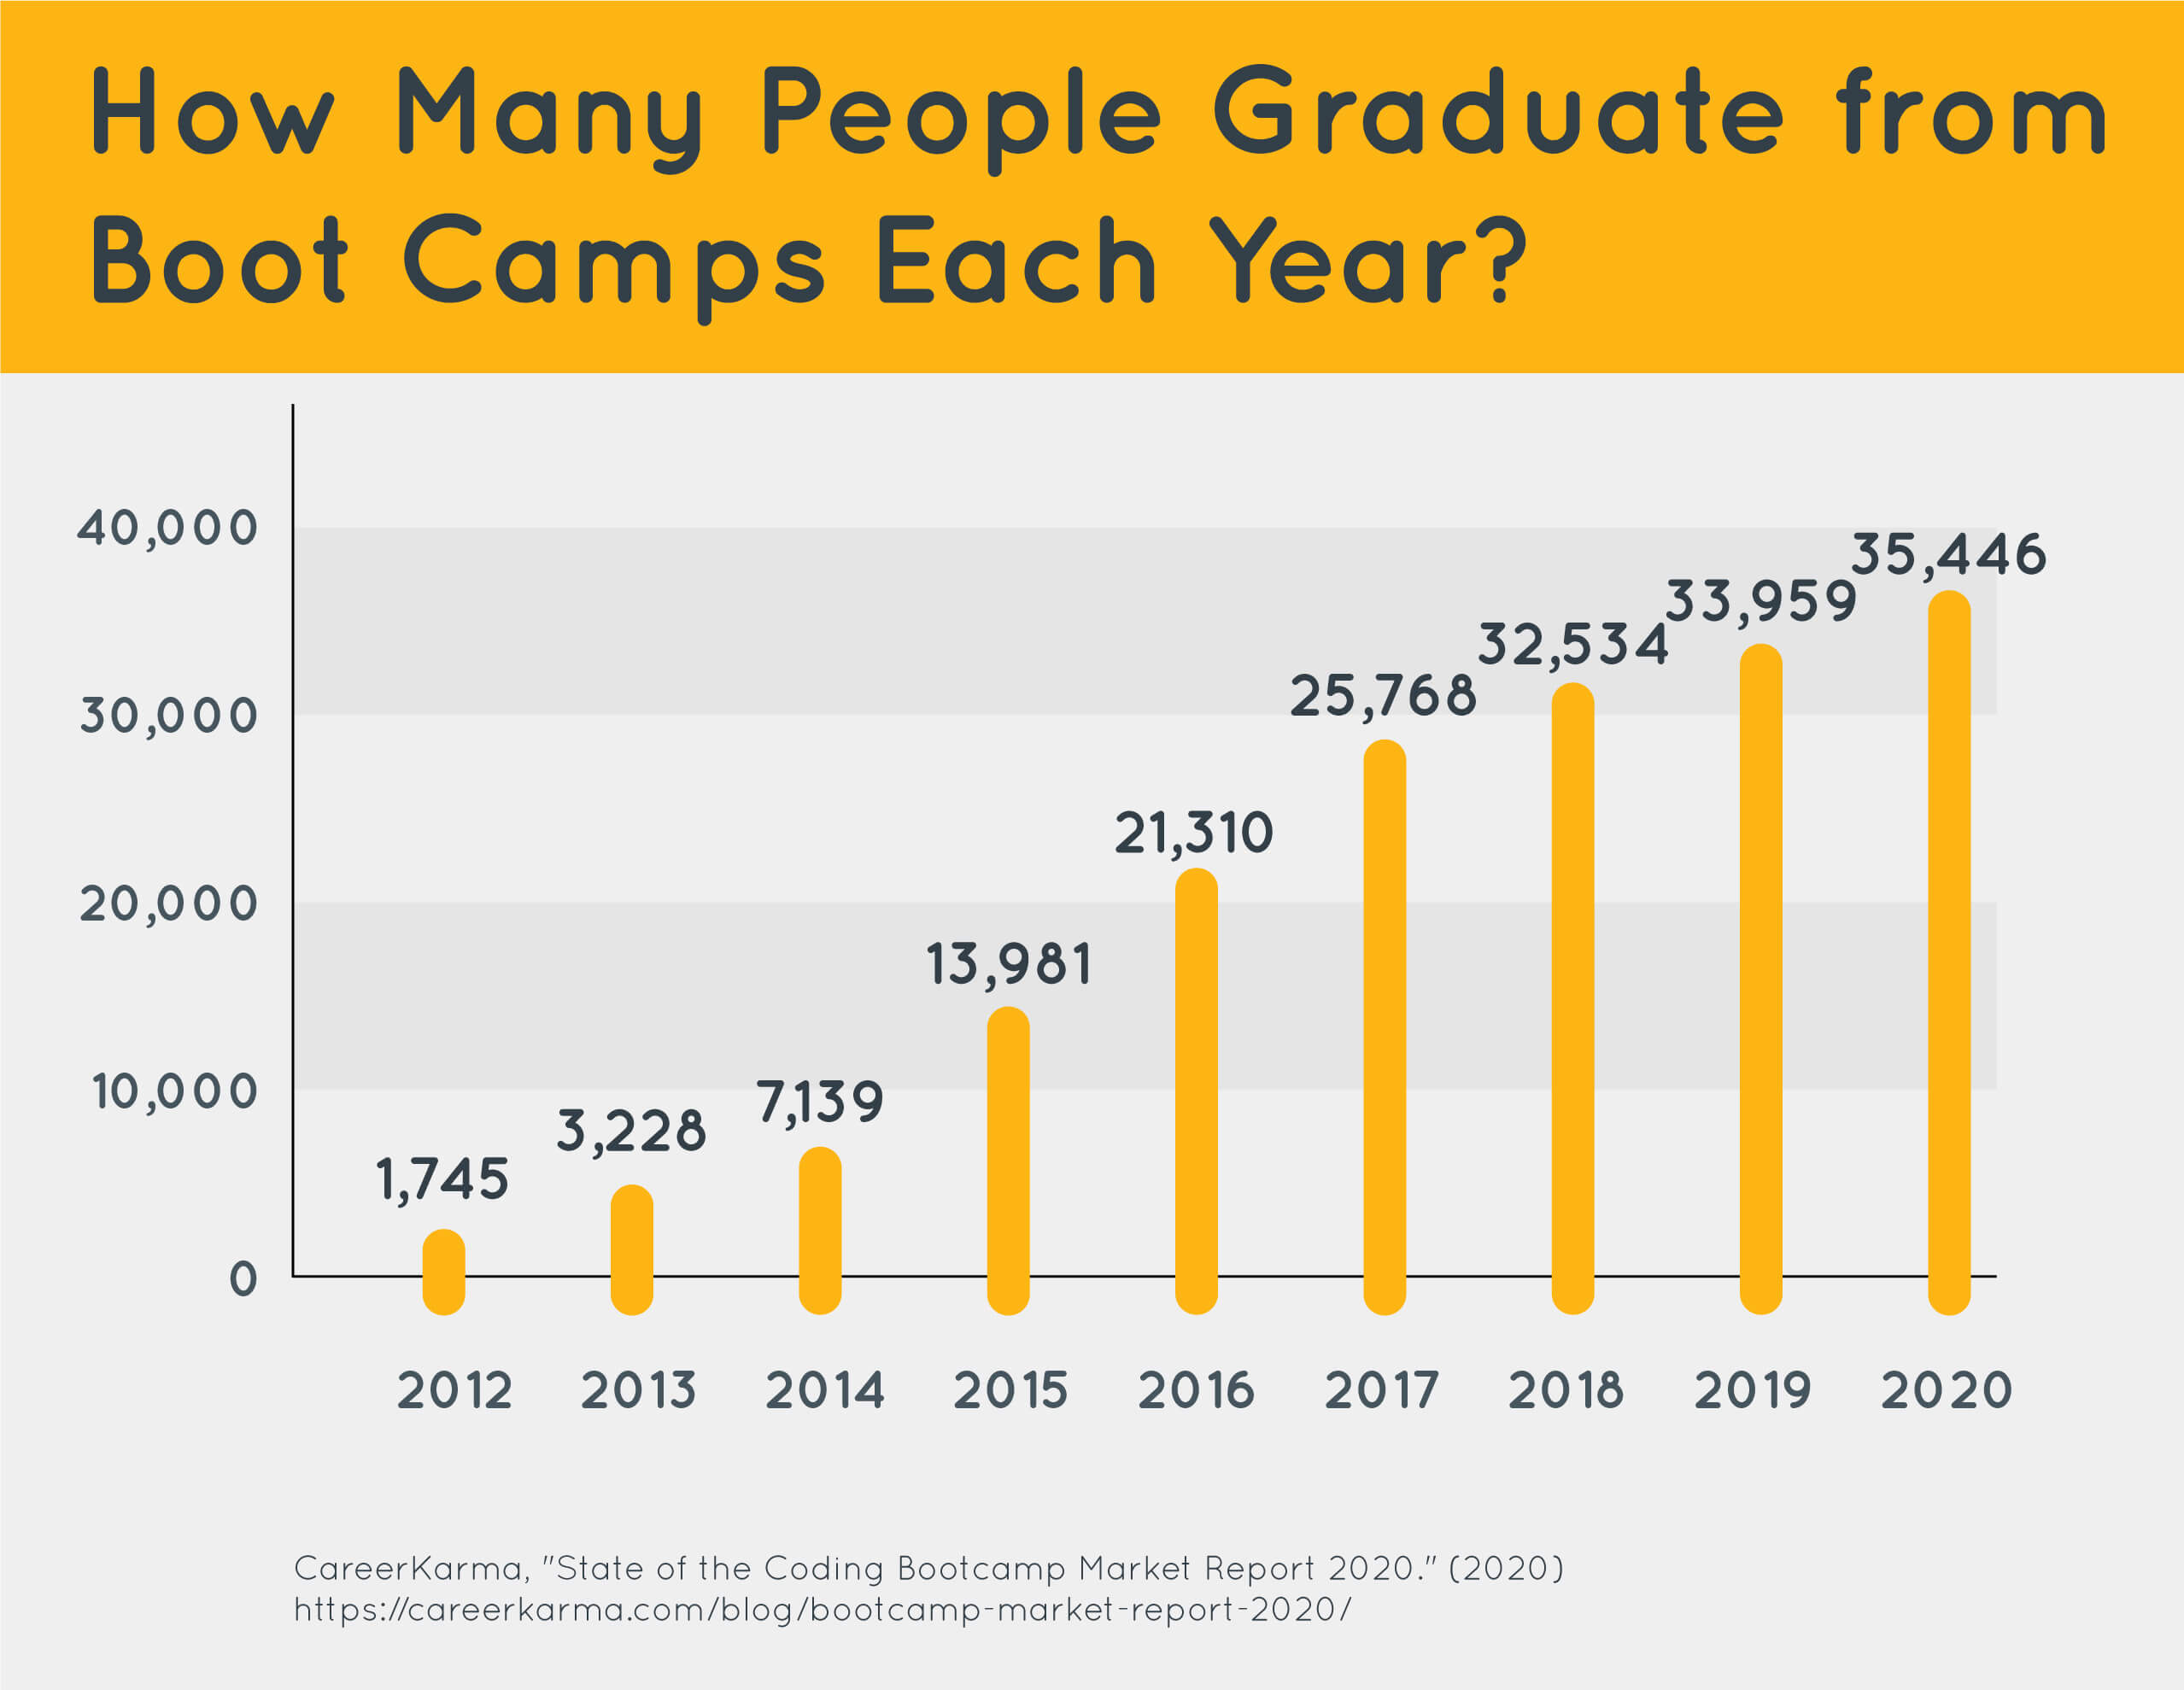 A chart that shows how many people graduate from boot camps each year